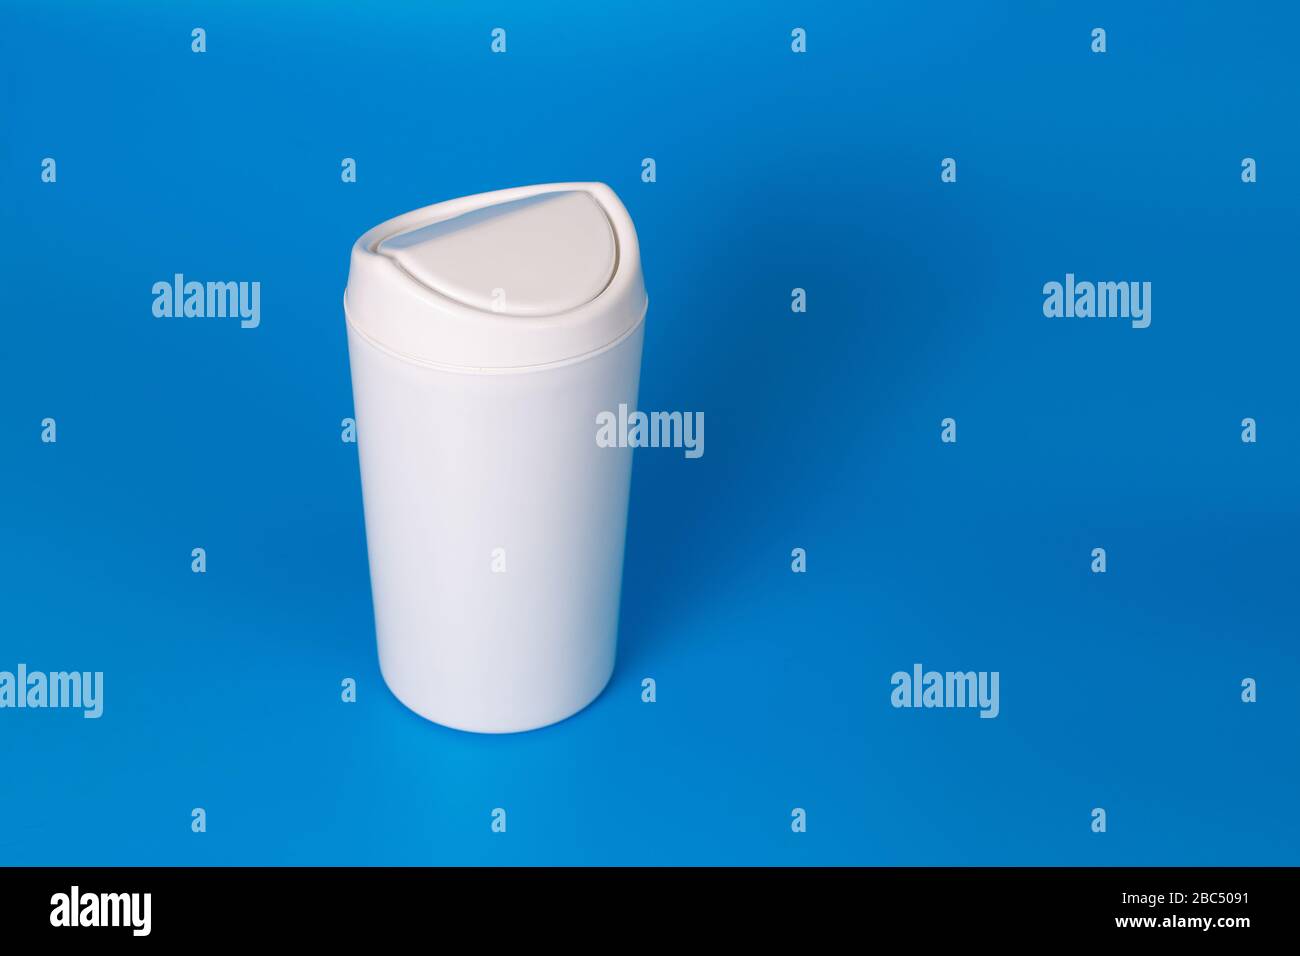 Small table white trash can on a blue background. Copy space. Stock Photo